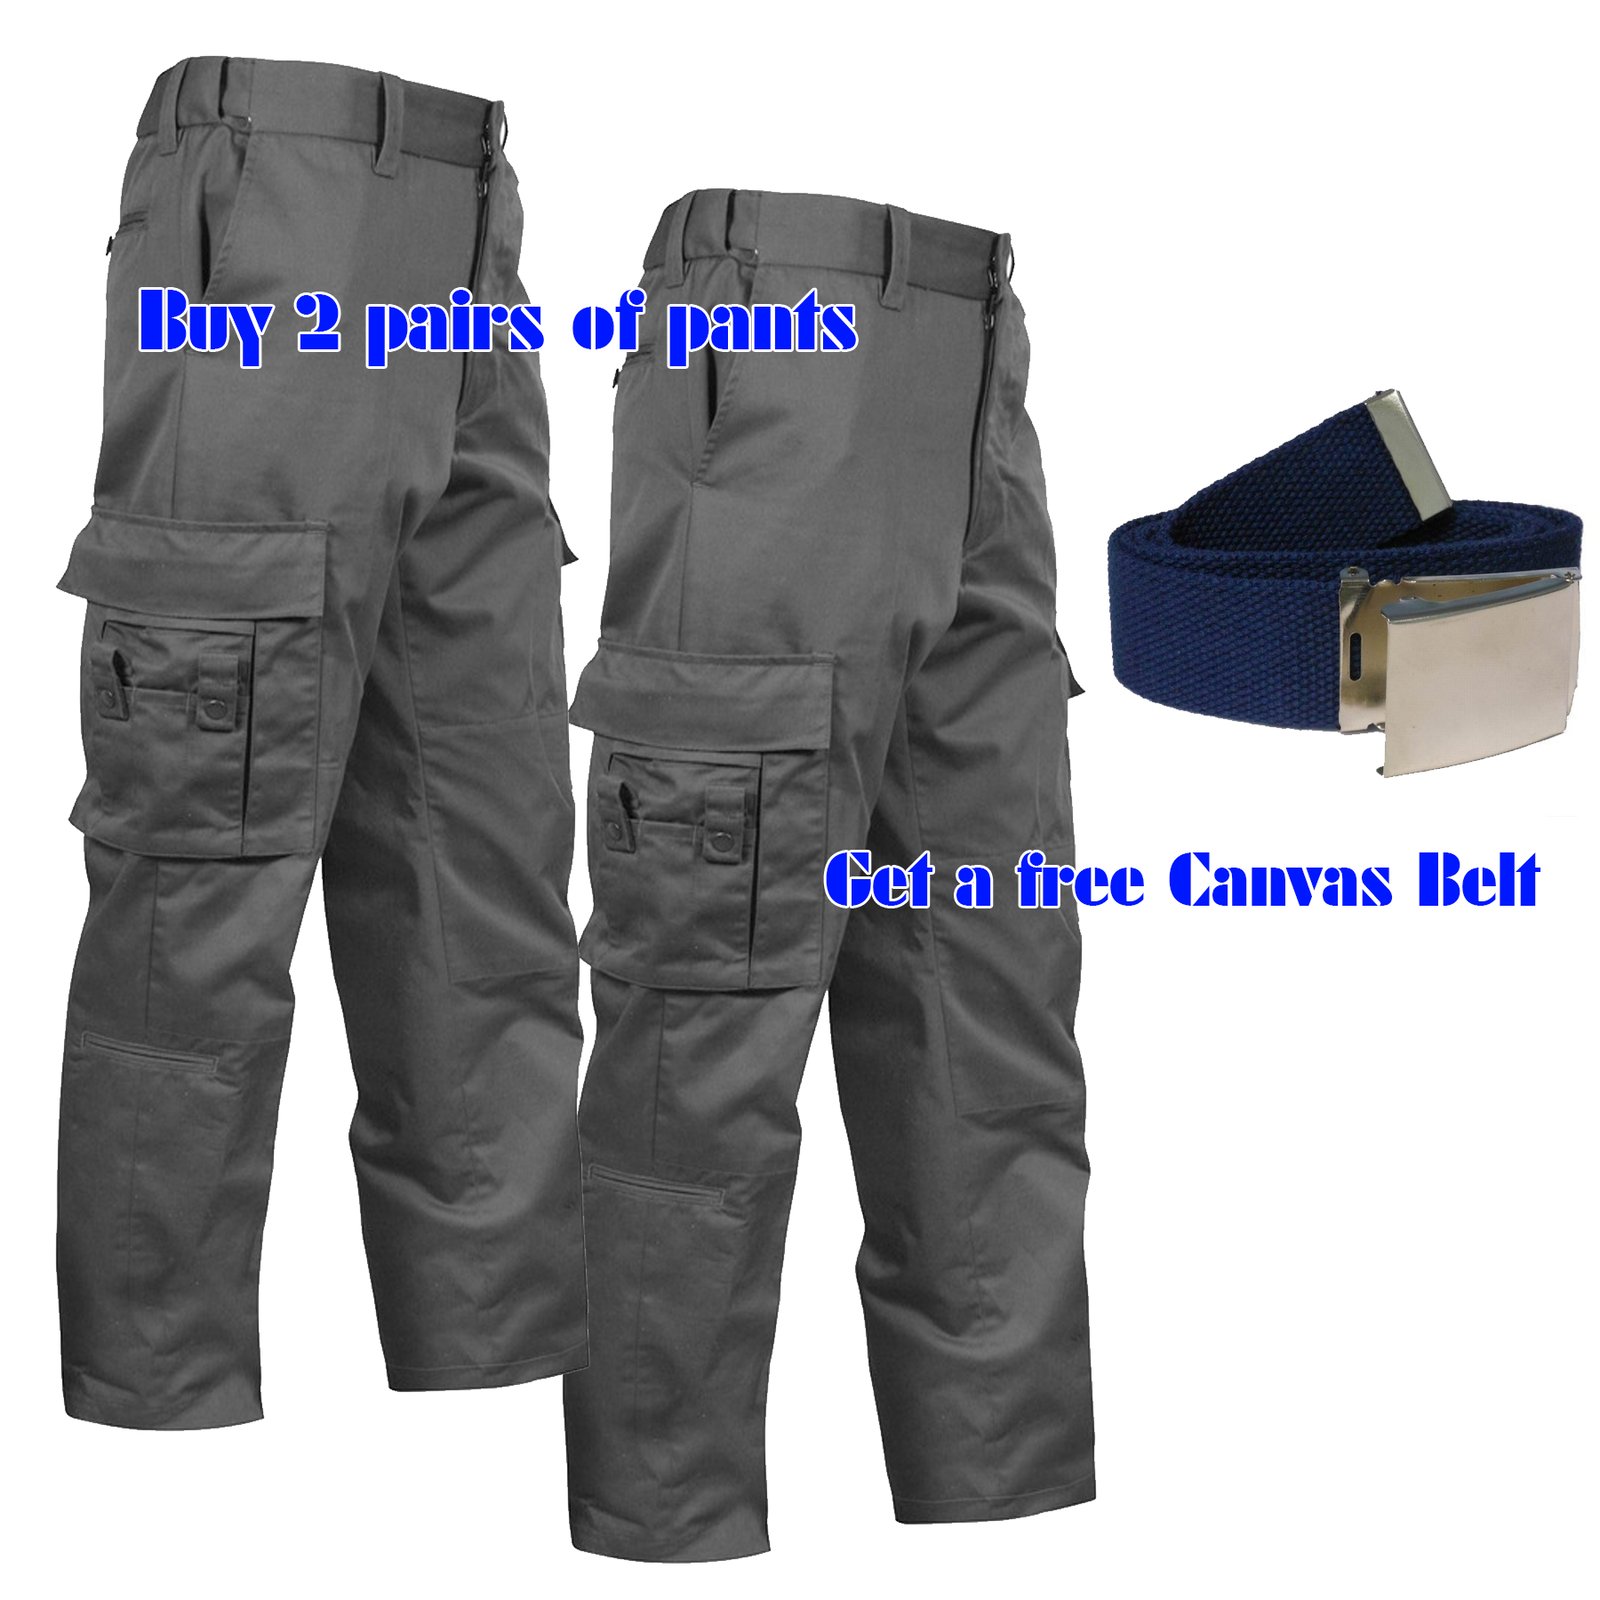 Amazoncom LA Police Gear Mens Stretch EMS Pant Tactical EMT Uniform Cargo  Pants for Men First ResponderParamedic WorkUtility Pant  OD Green  28  x 34 Clothing Shoes  Jewelry